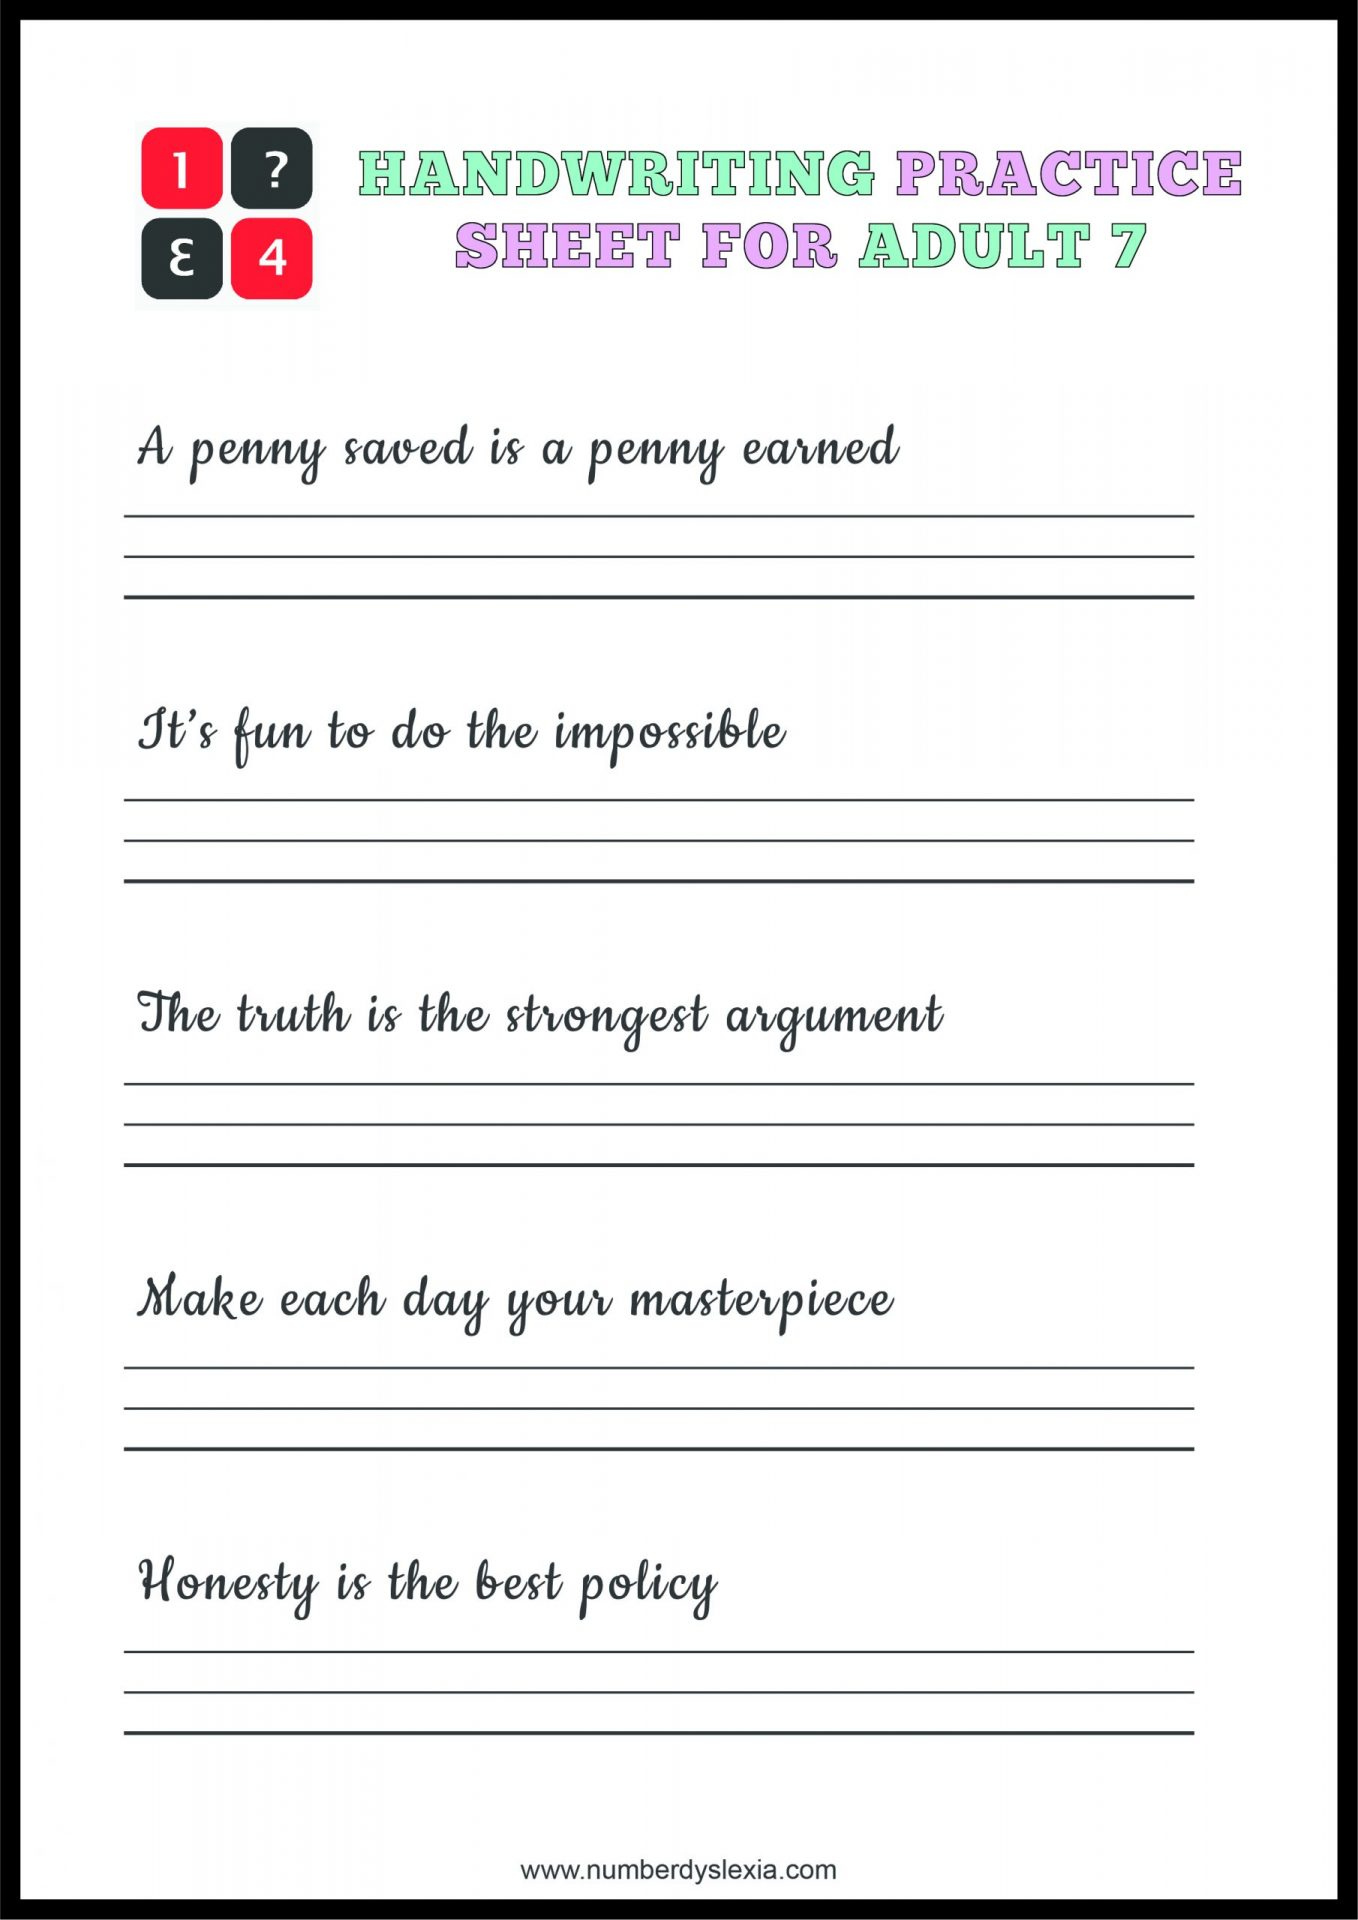 free-worksheets-printable-workbooks-for-adults-ronald-worksheets